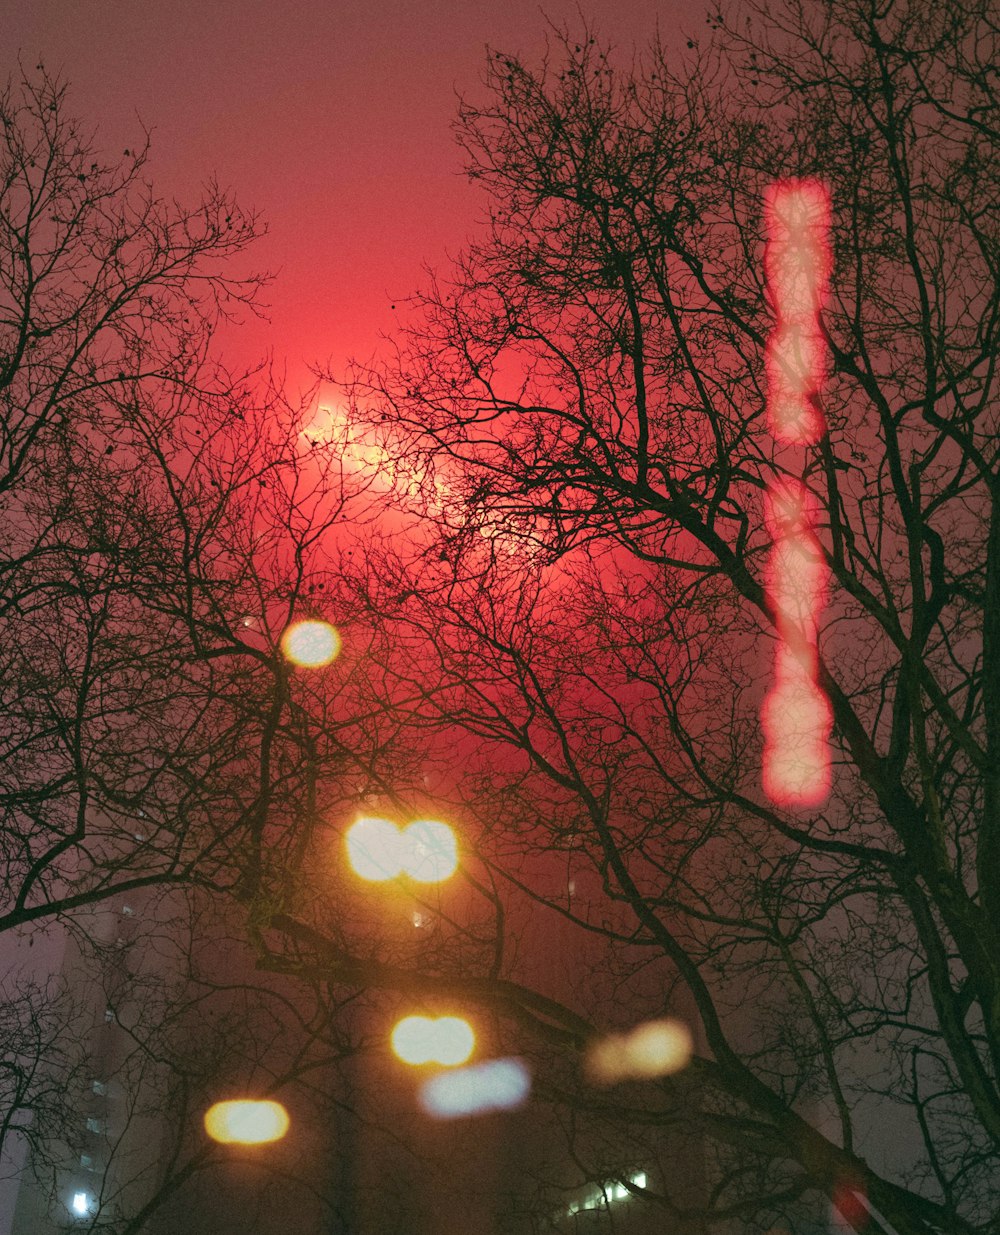 a red light shines in the distance behind trees